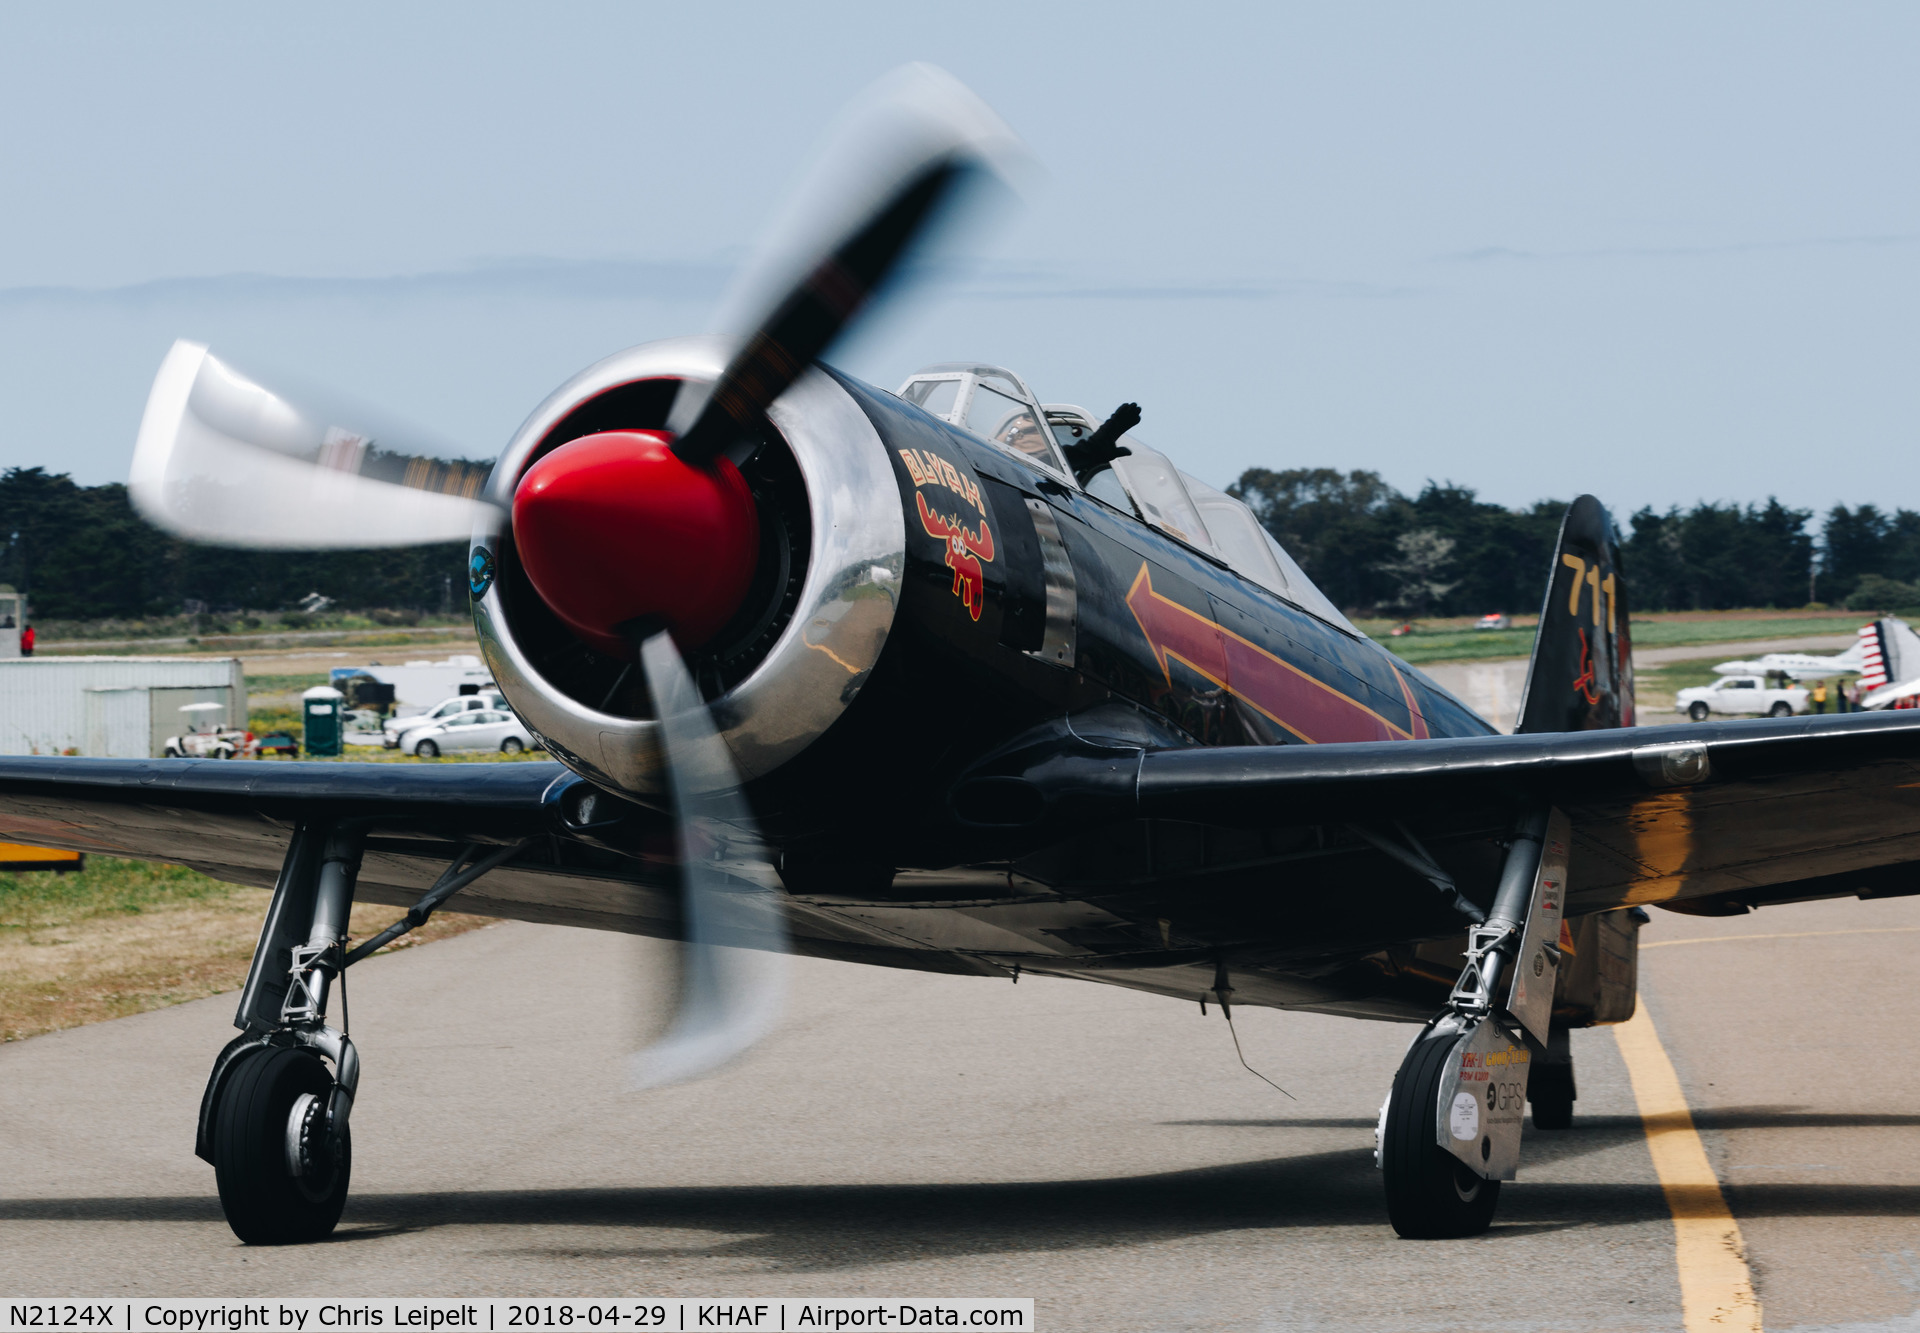 N2124X, 1952 Yakovlev Yak-11 C/N 102146, 1952 Yak-11 taxing out for departure at Half Moon Bay Airport Day 2018.